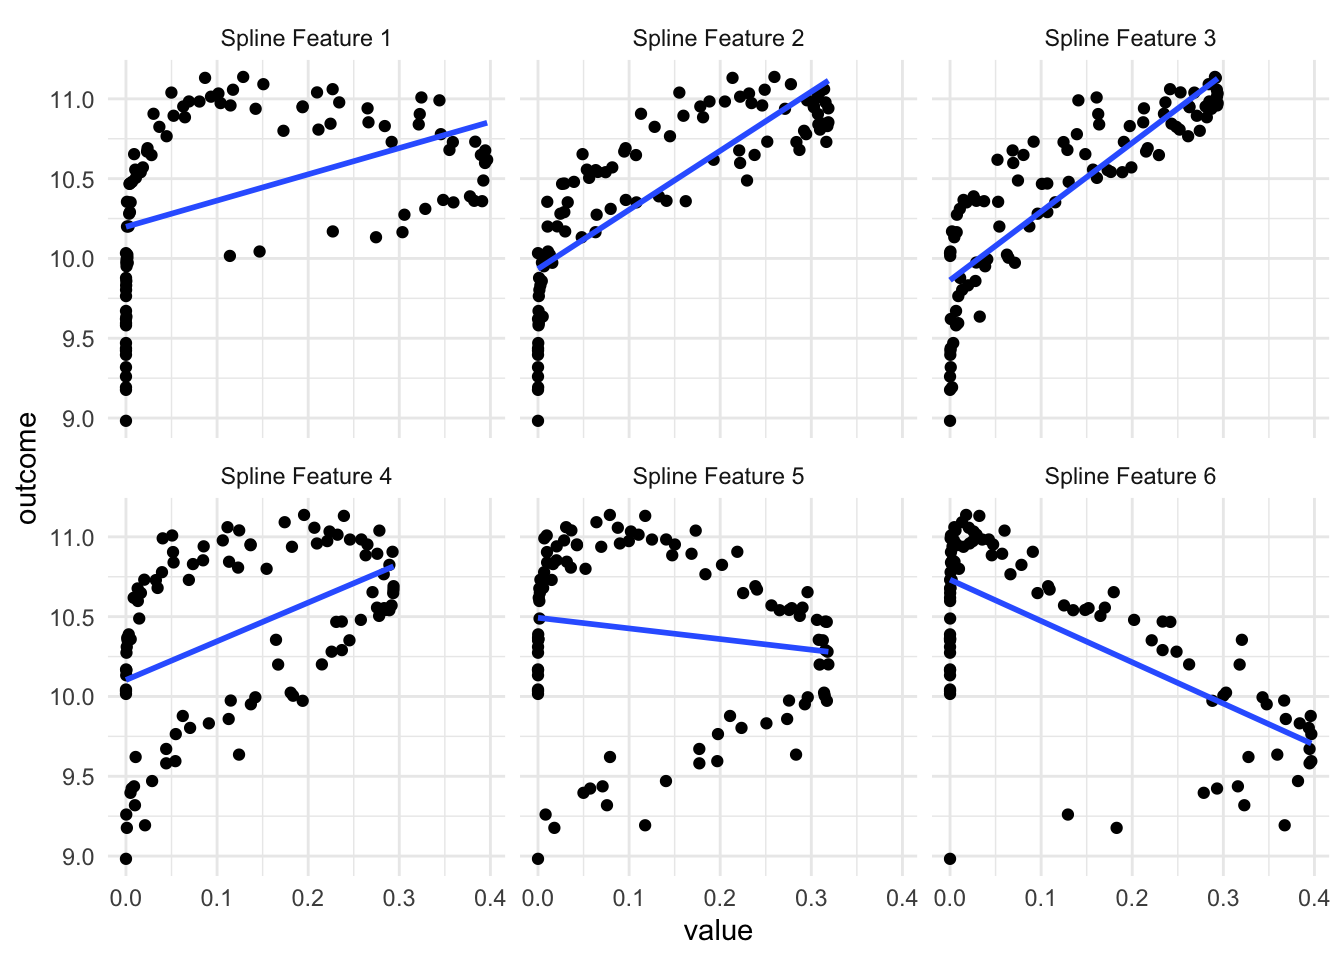 Facetted scatter chart. Spline value along the x-axis, outcome along the y-axis. Each facet shows the relationship between one of the spline terms and the outcome. Some of them are non-linear, and a couple of them are fairly linear. A fitted line is overlaid in blue.